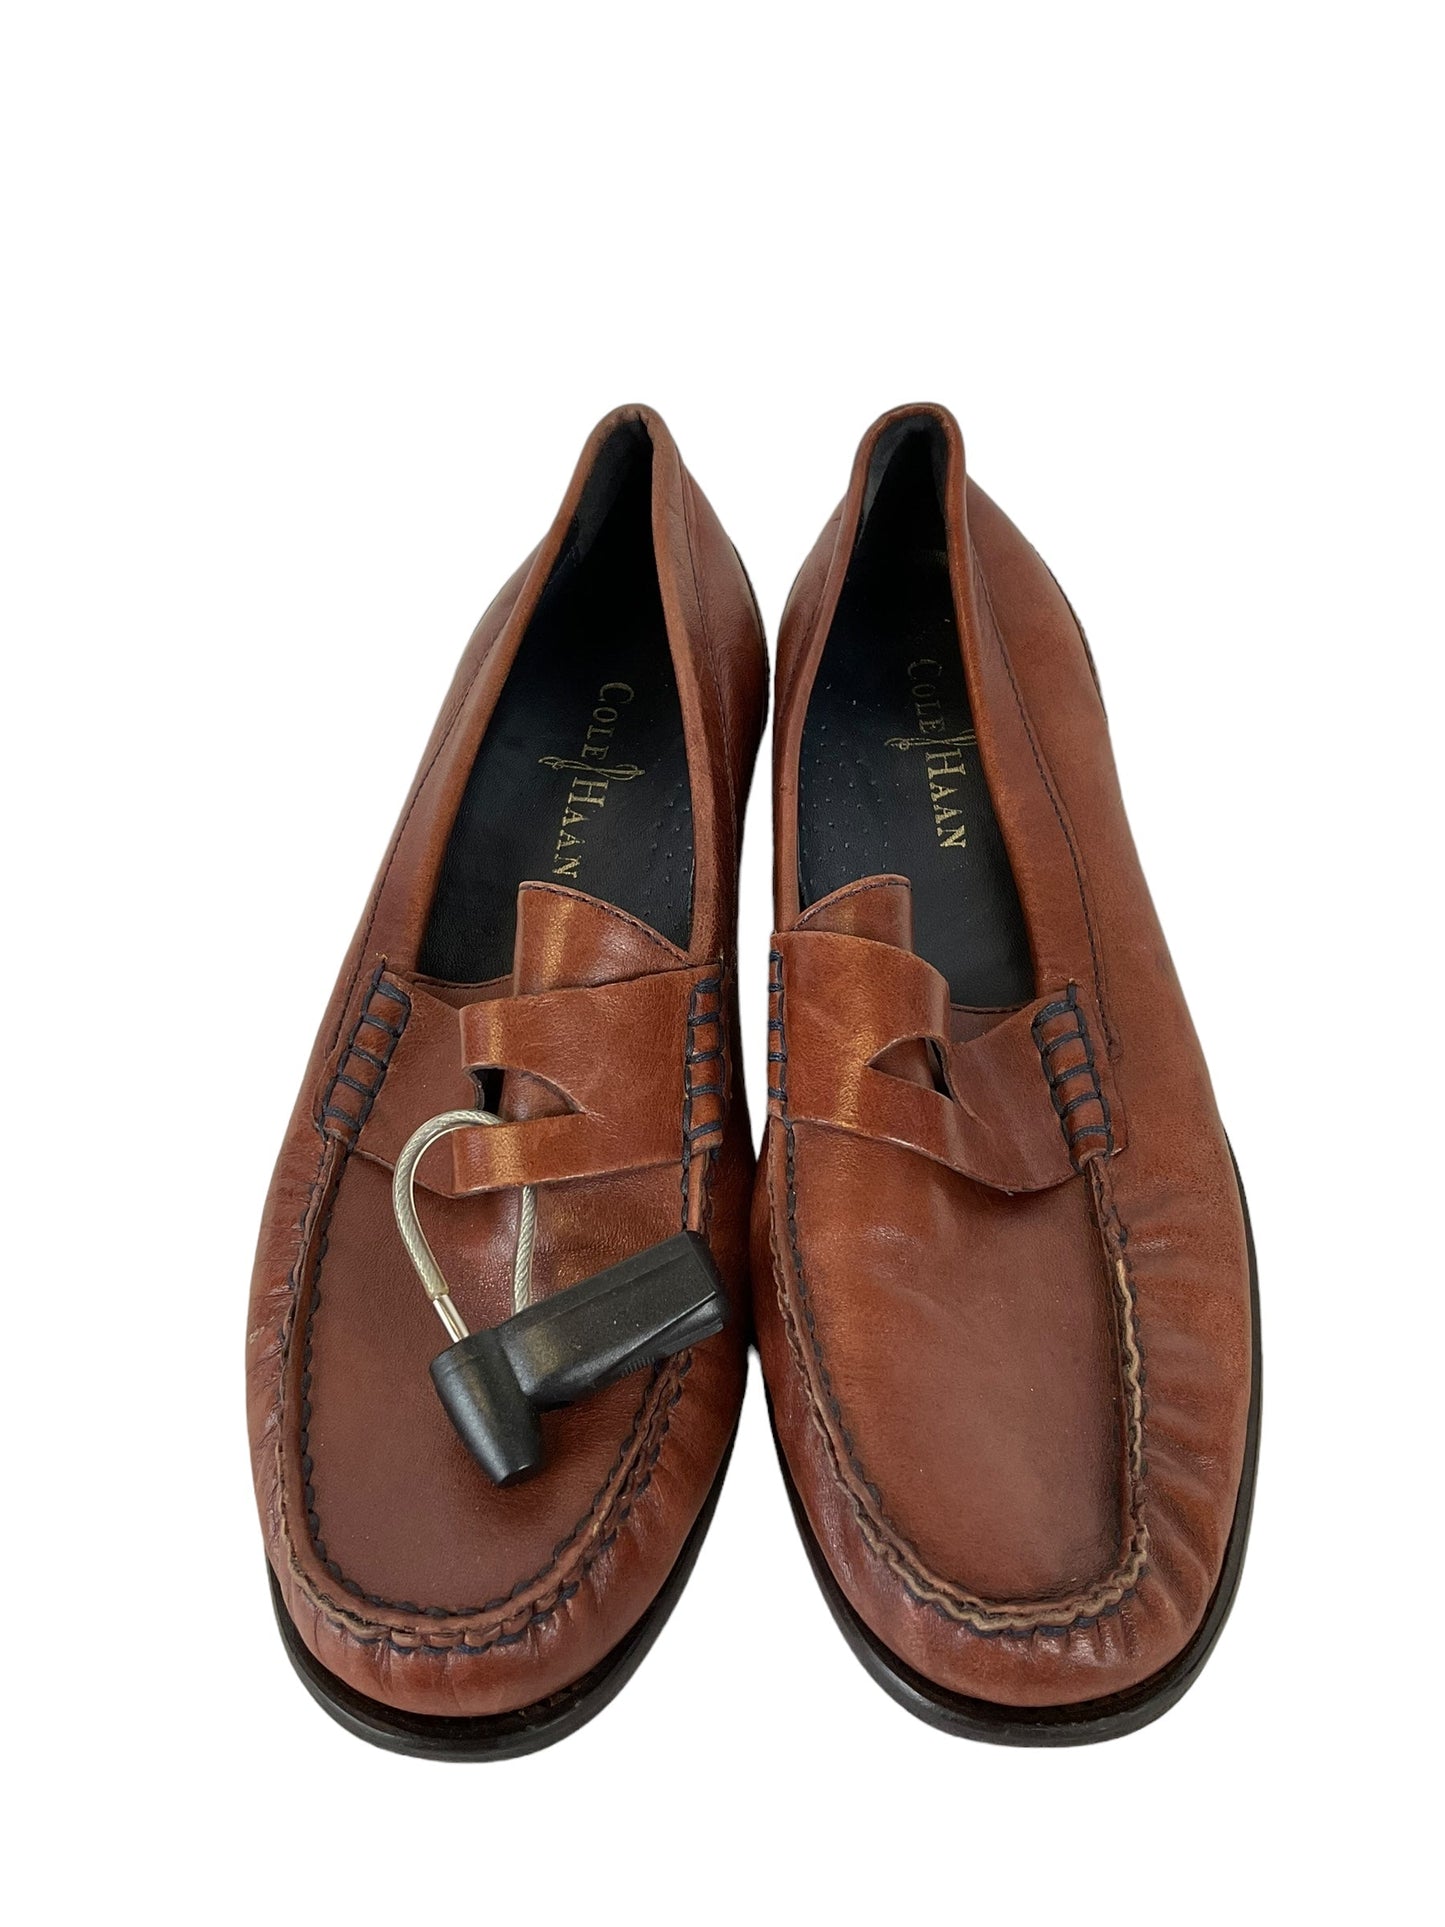 Brown Shoes Flats Cole-haan, Size 7.5